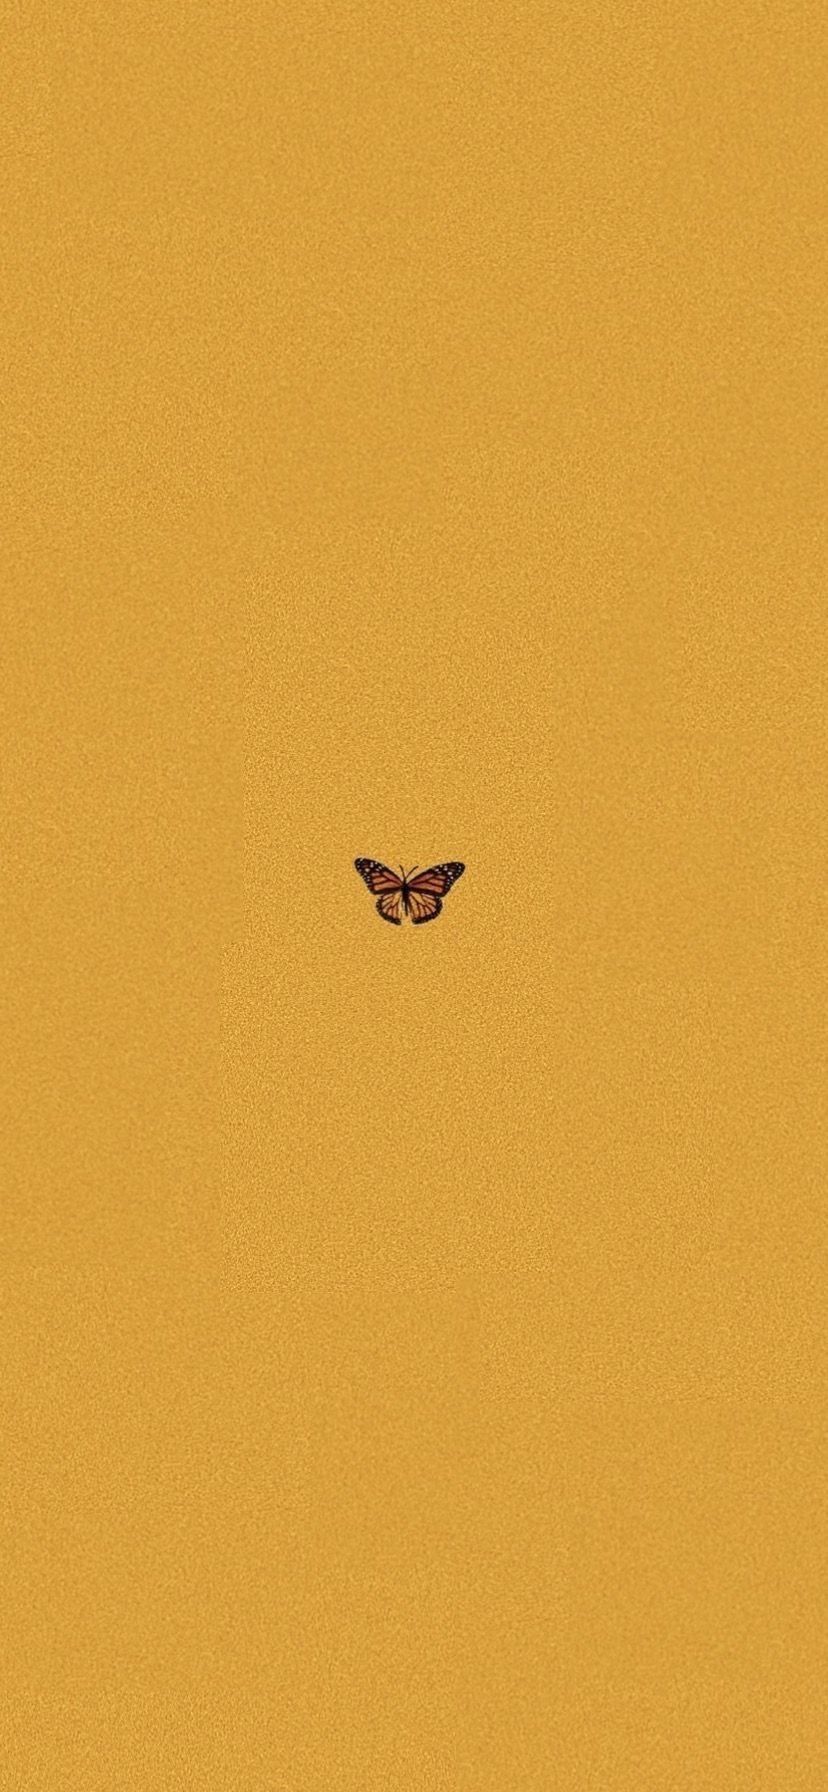 Butterfly iPhone Wallpaper Tumblr